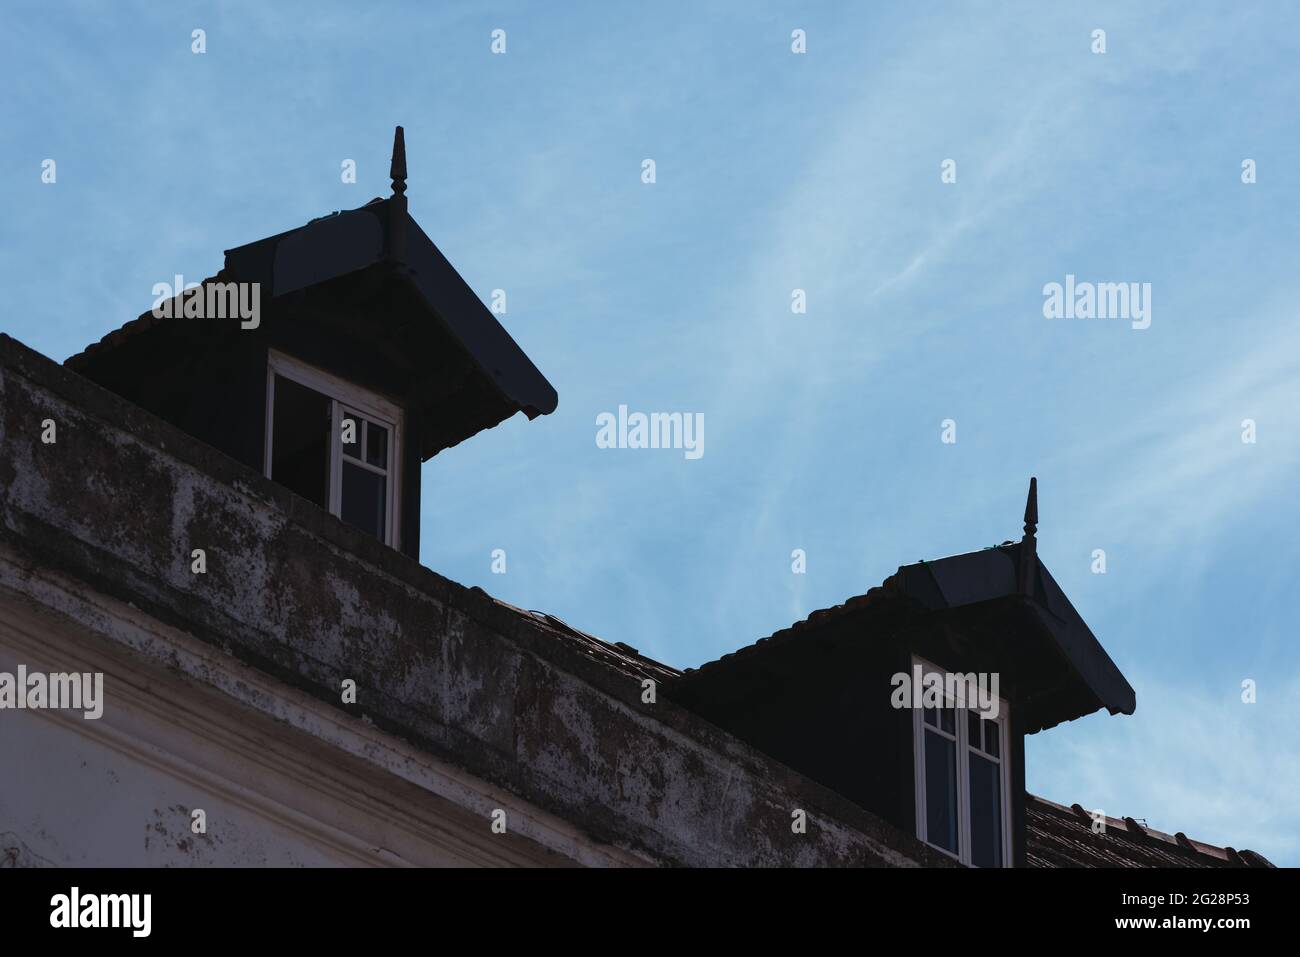 Low angle shot of two false dormer windows on a shingles covered roof Stock Photo